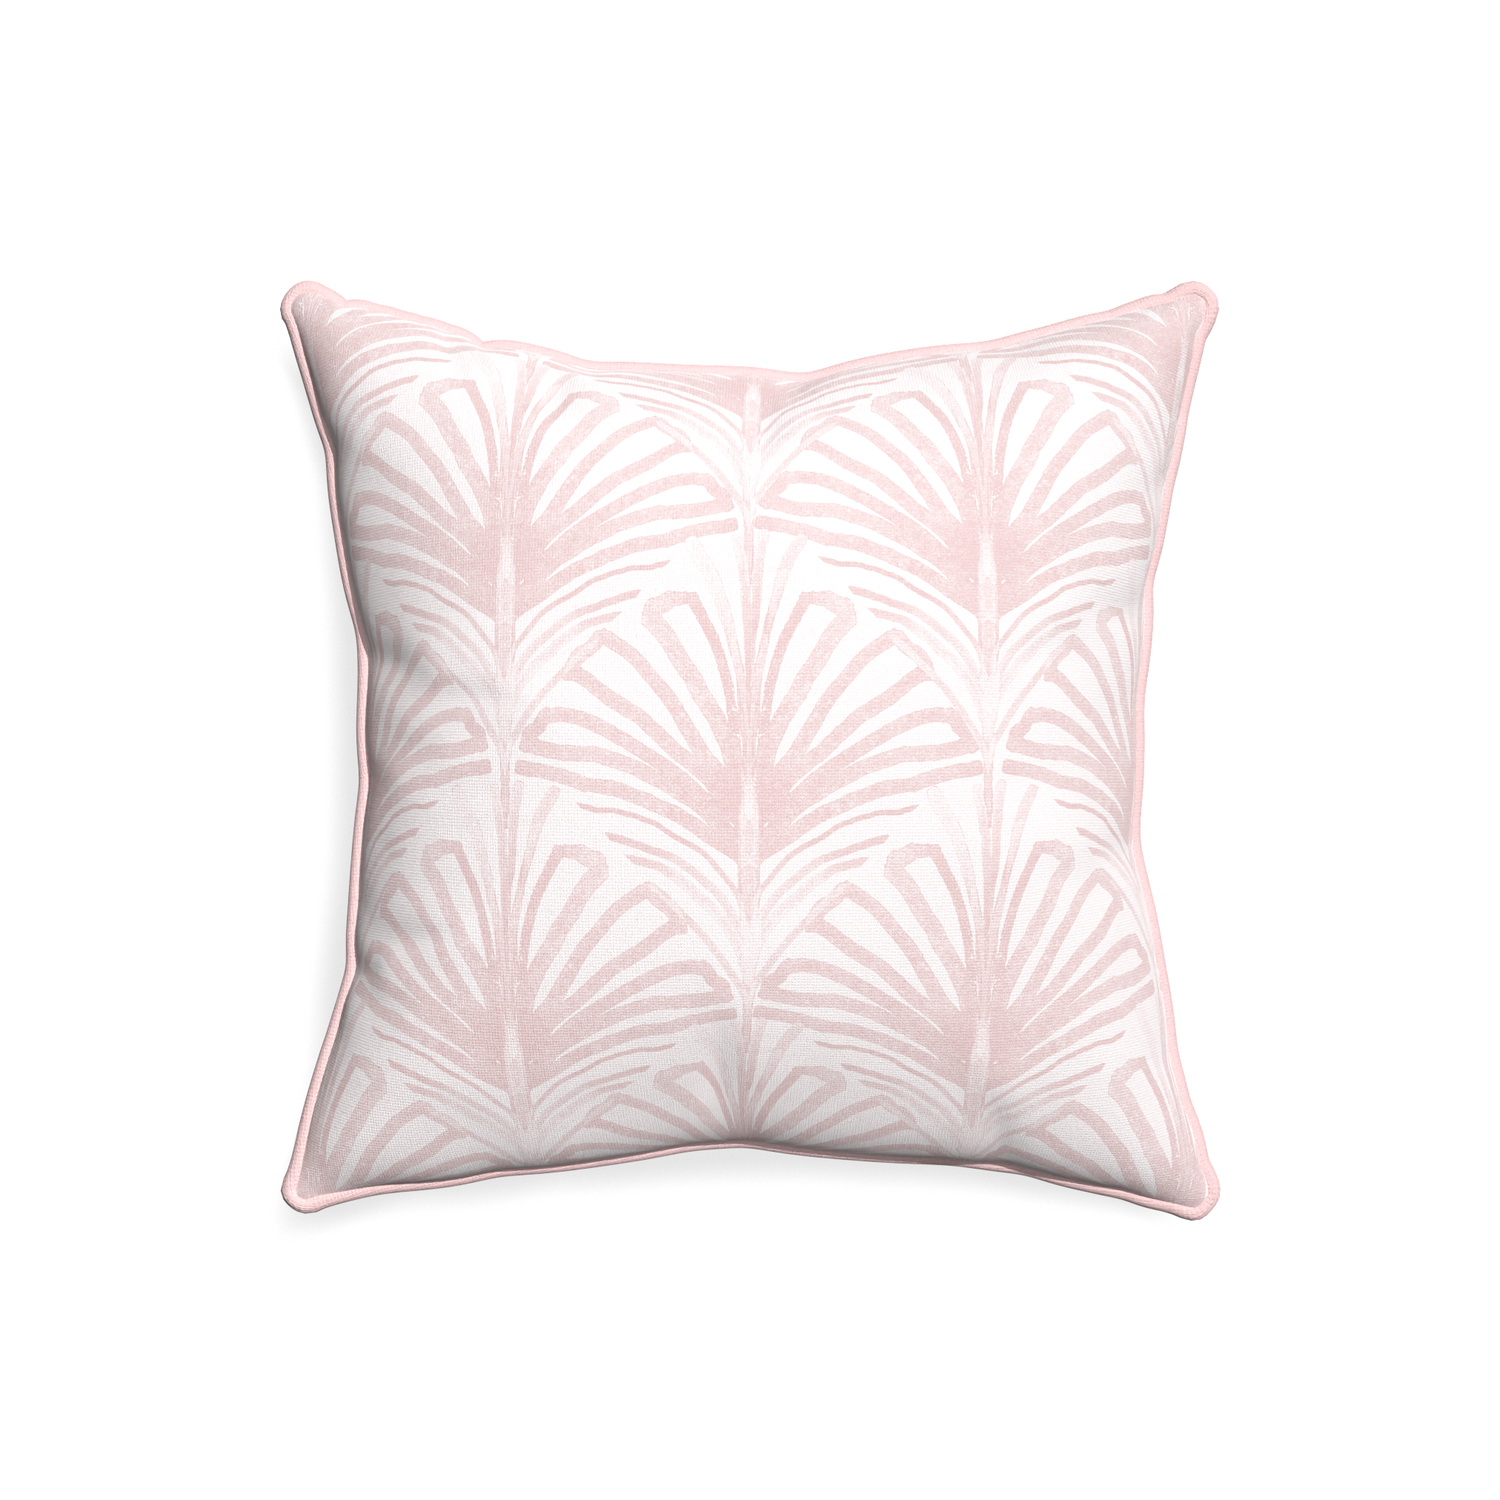 20-square suzy rose custom pillow with petal piping on white background